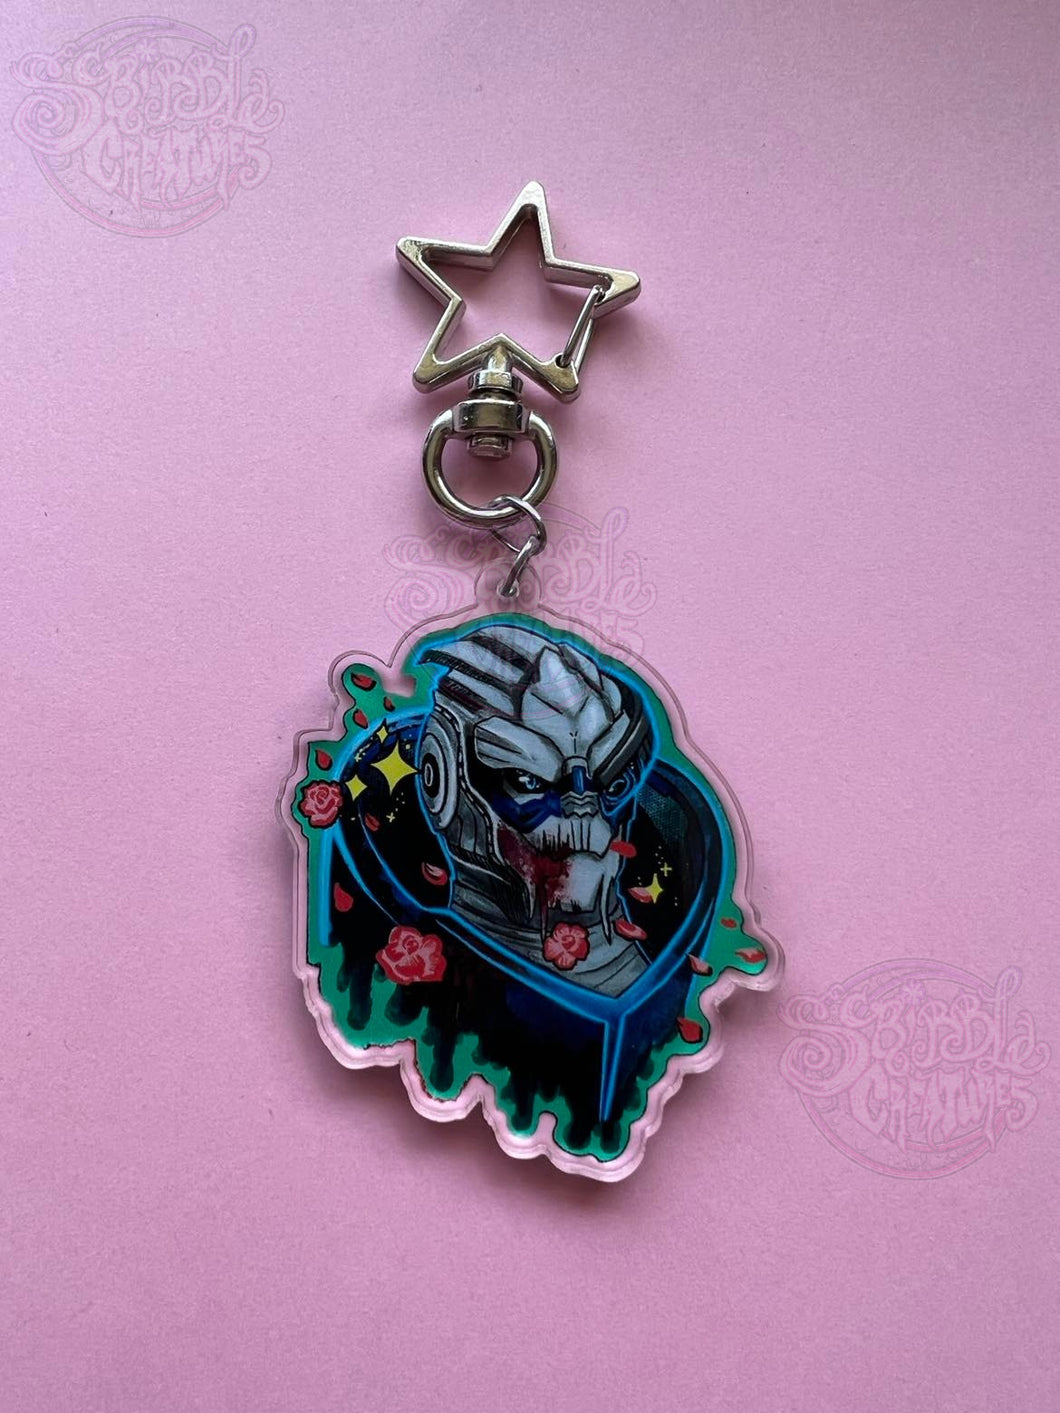 No Shepard without Vakarian Acrylic Charm by Scribble Creatures